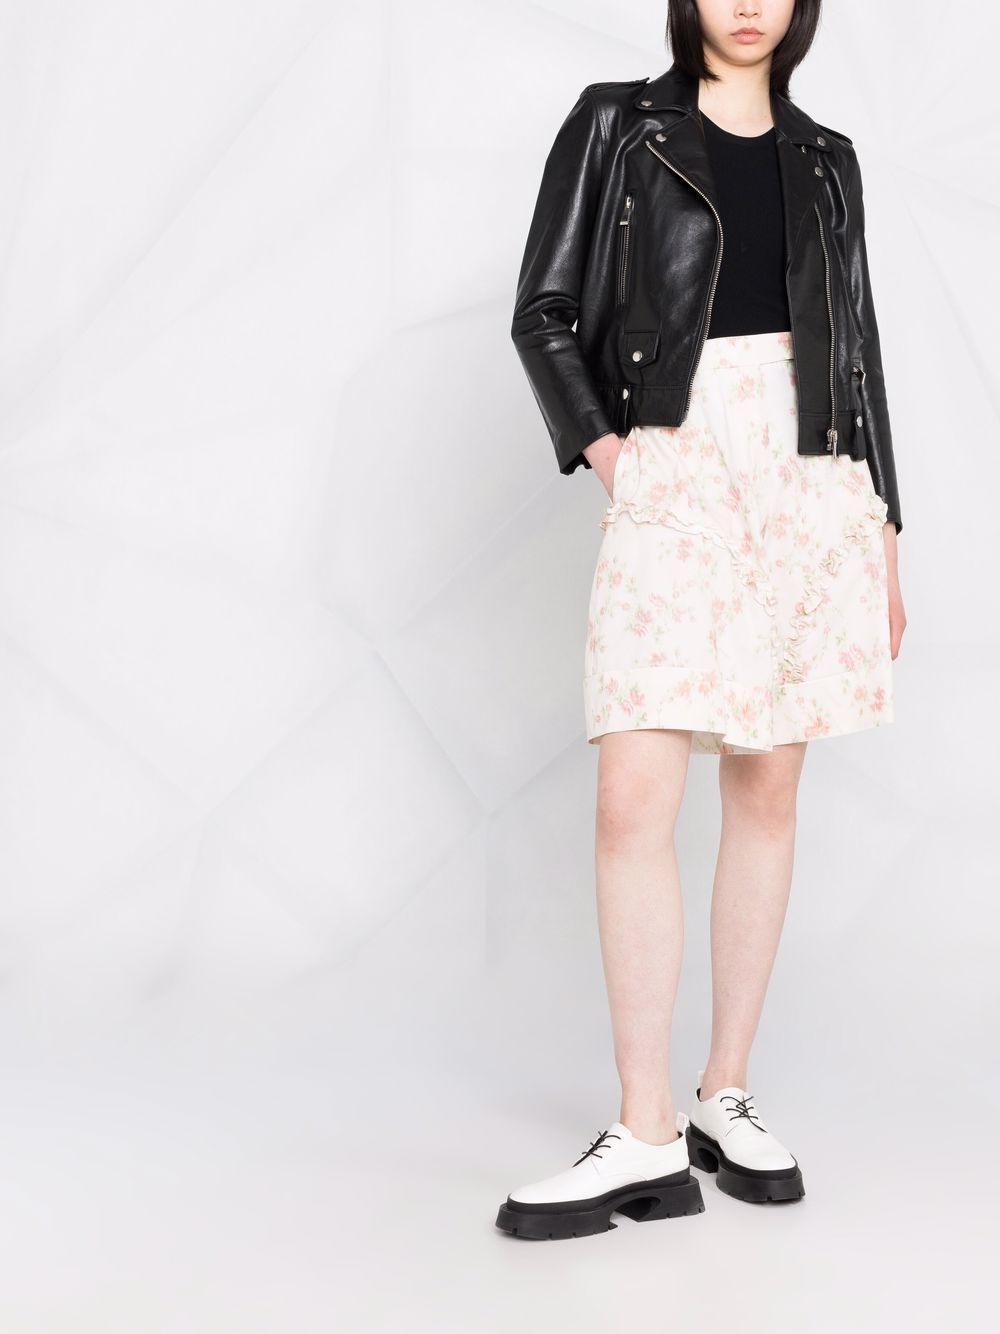 SIMONE ROCHA-Sculpted Wide Leg Shorts With Frill Detail-4031F 0481 WHT